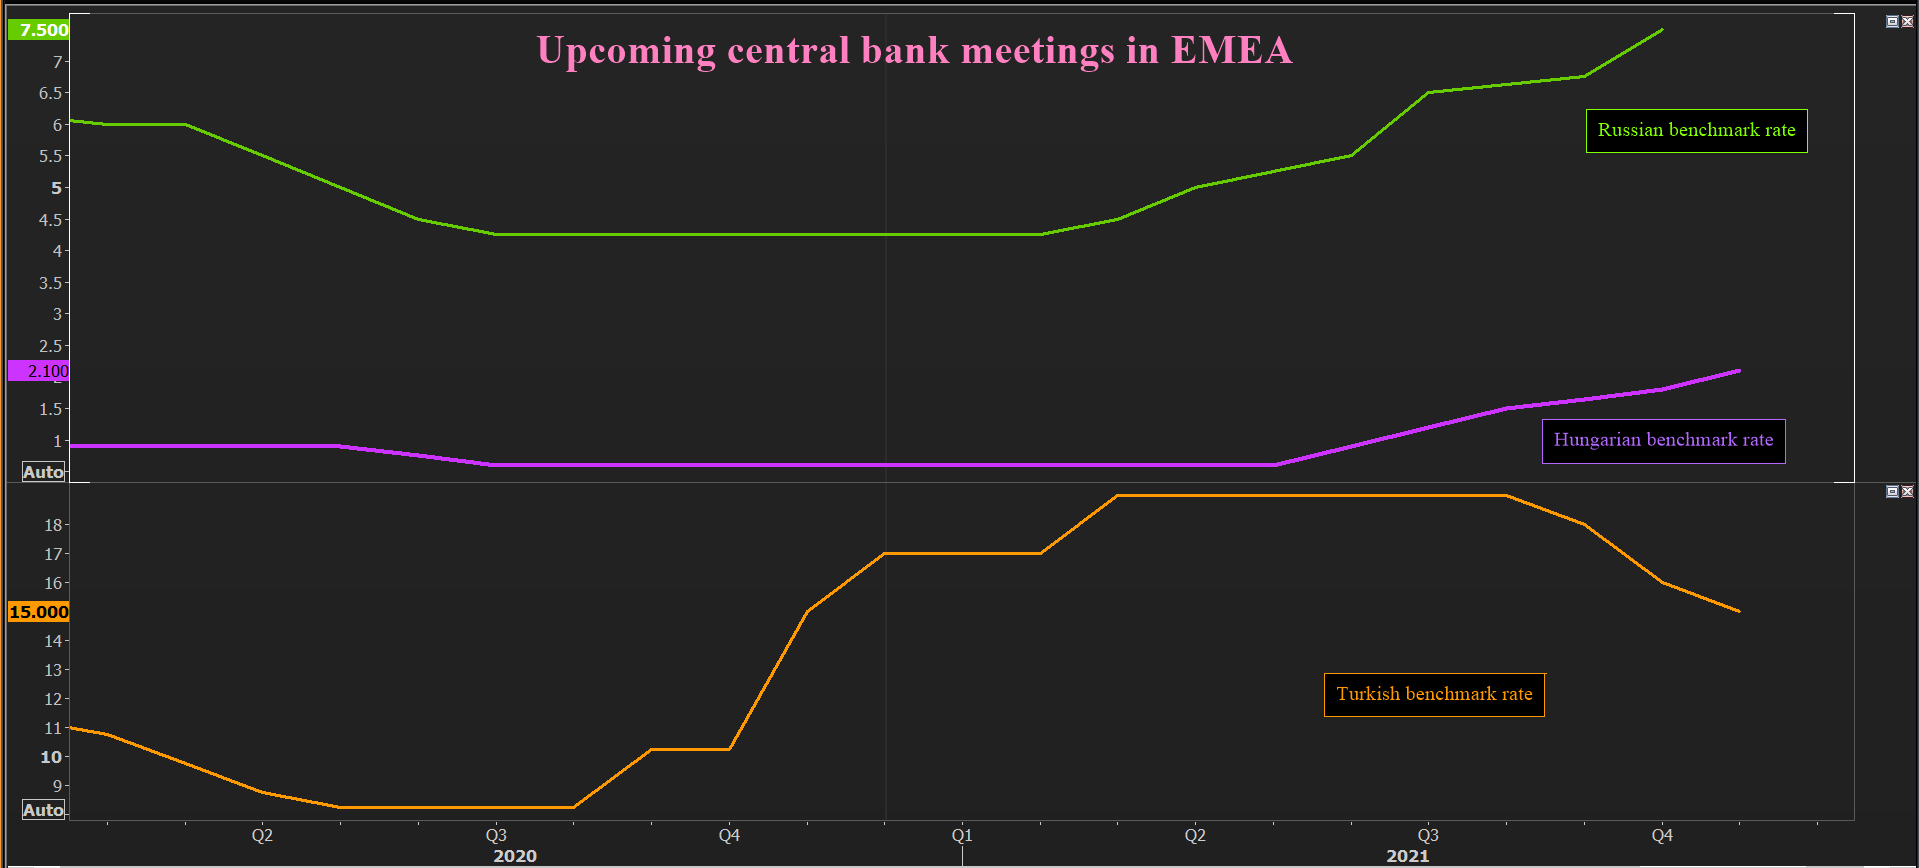 Upcoming central bank meetings in EMEA